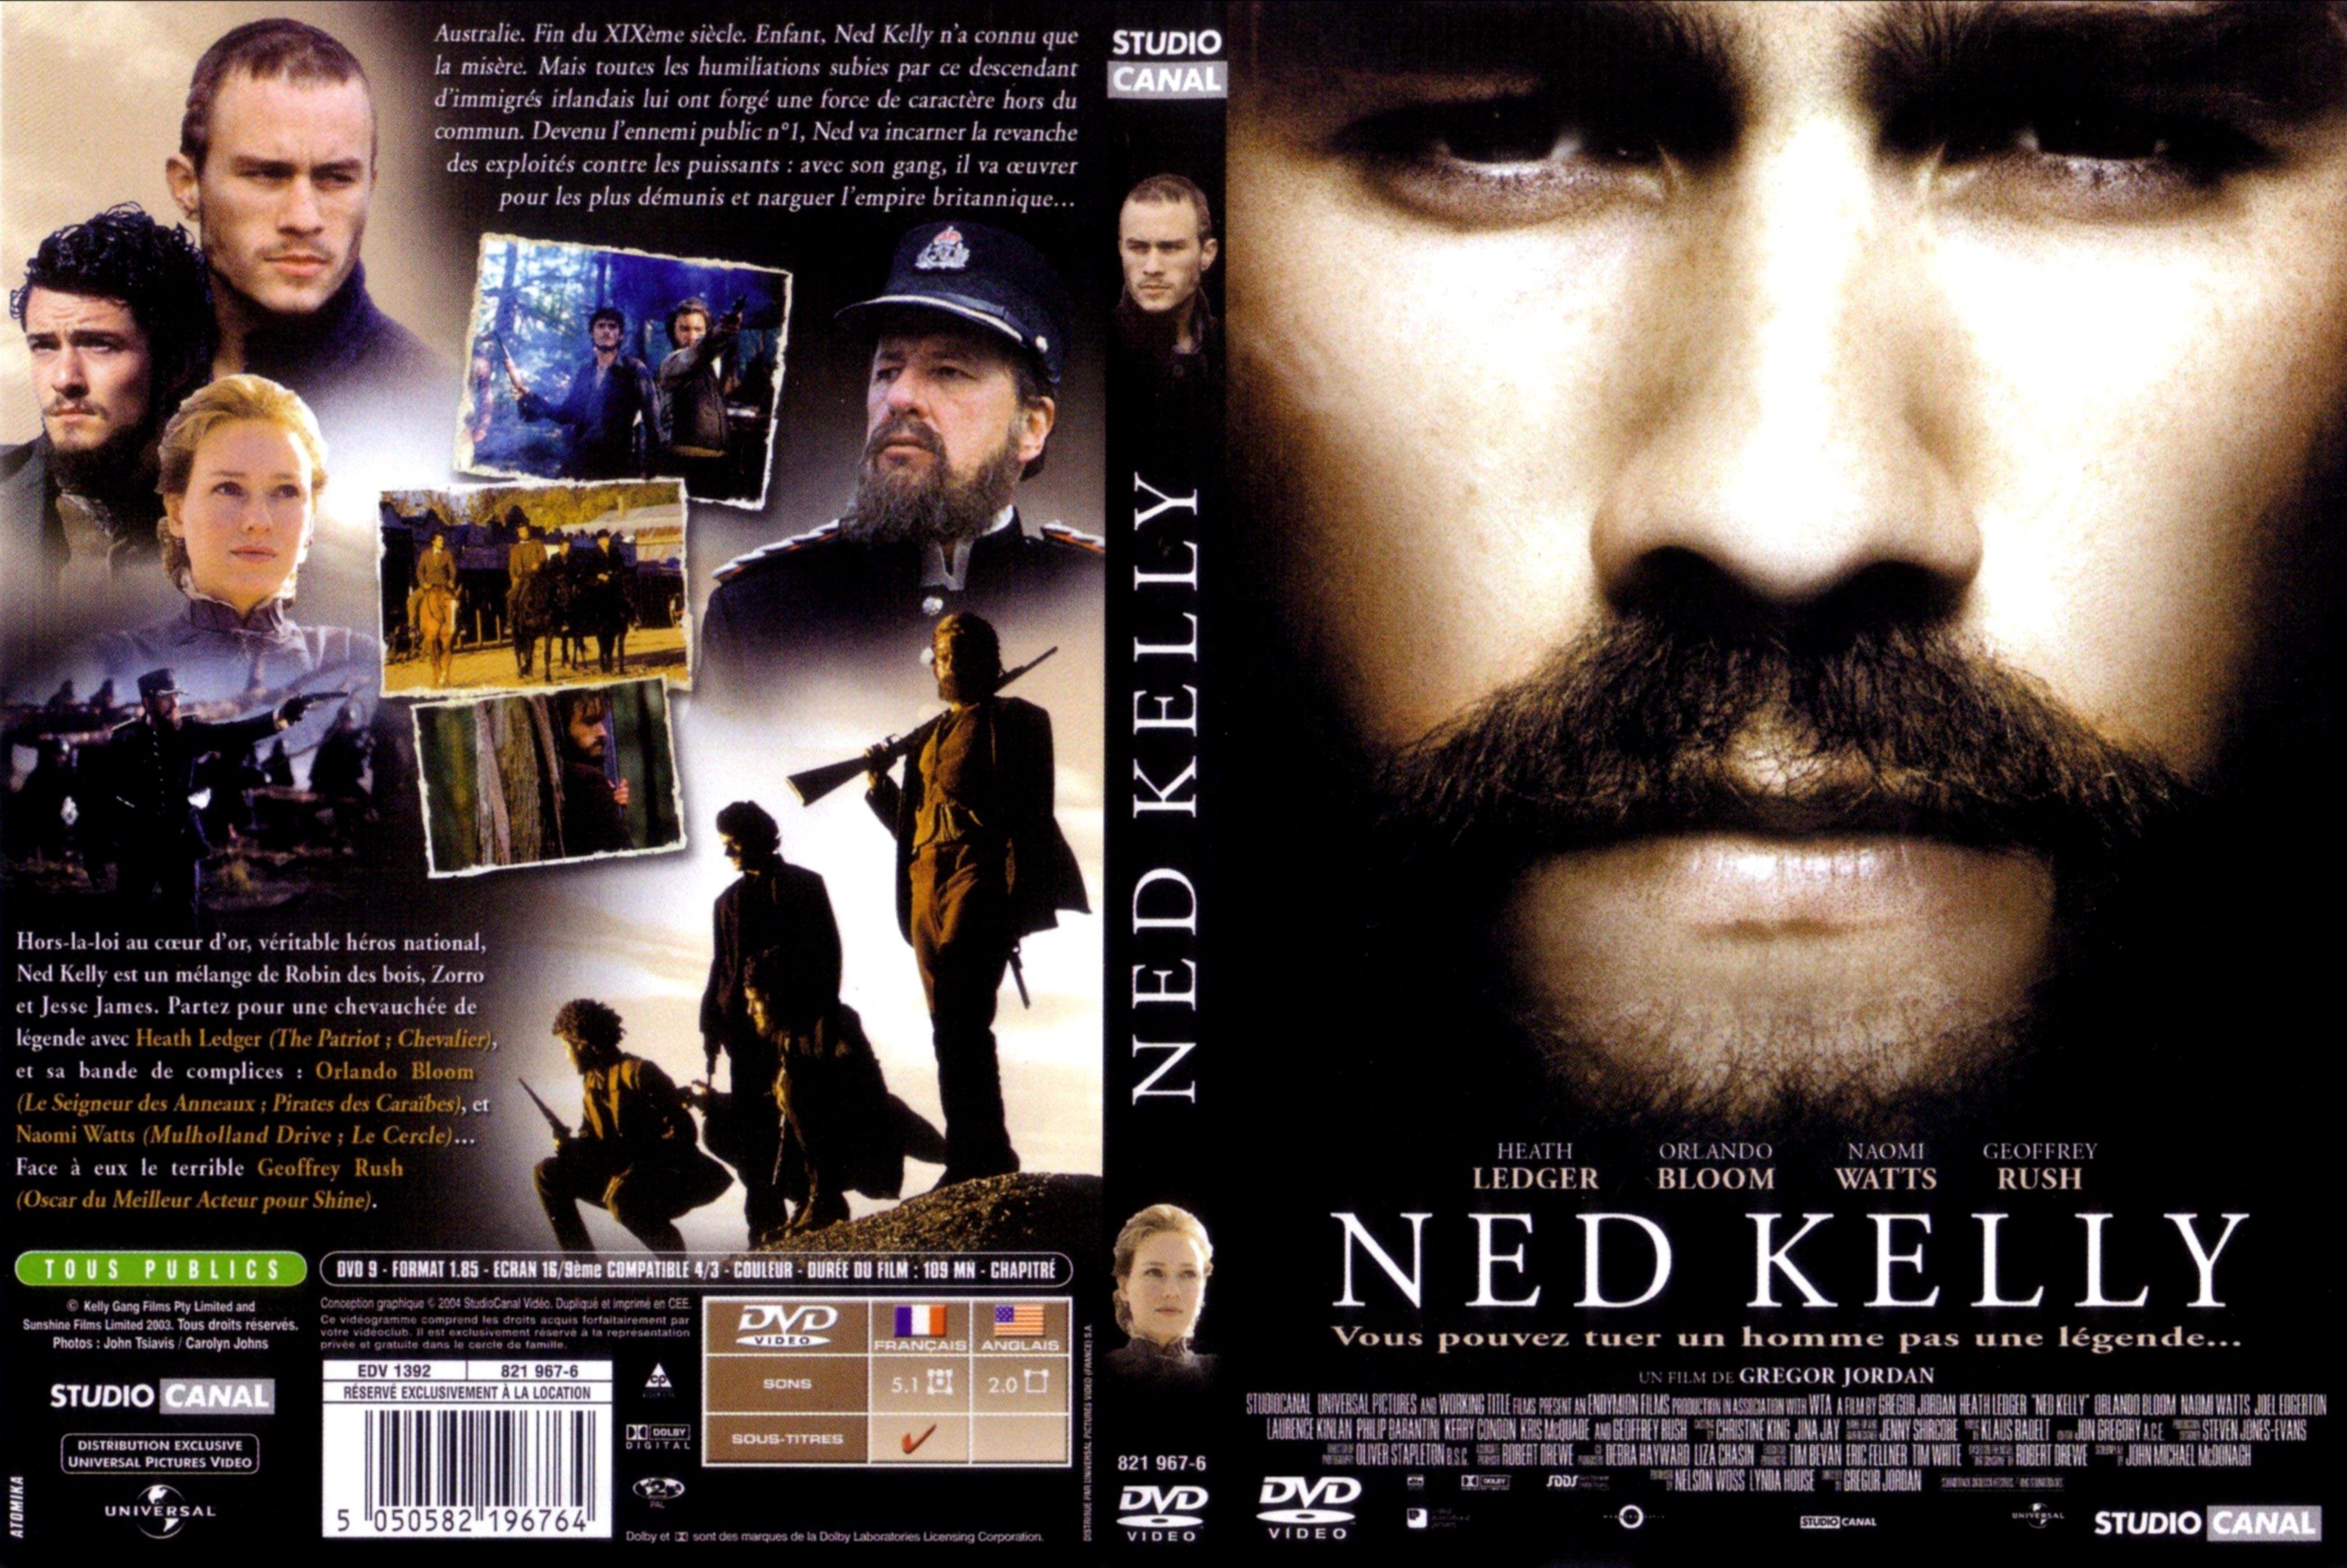 Jaquette DVD Ned Kelly